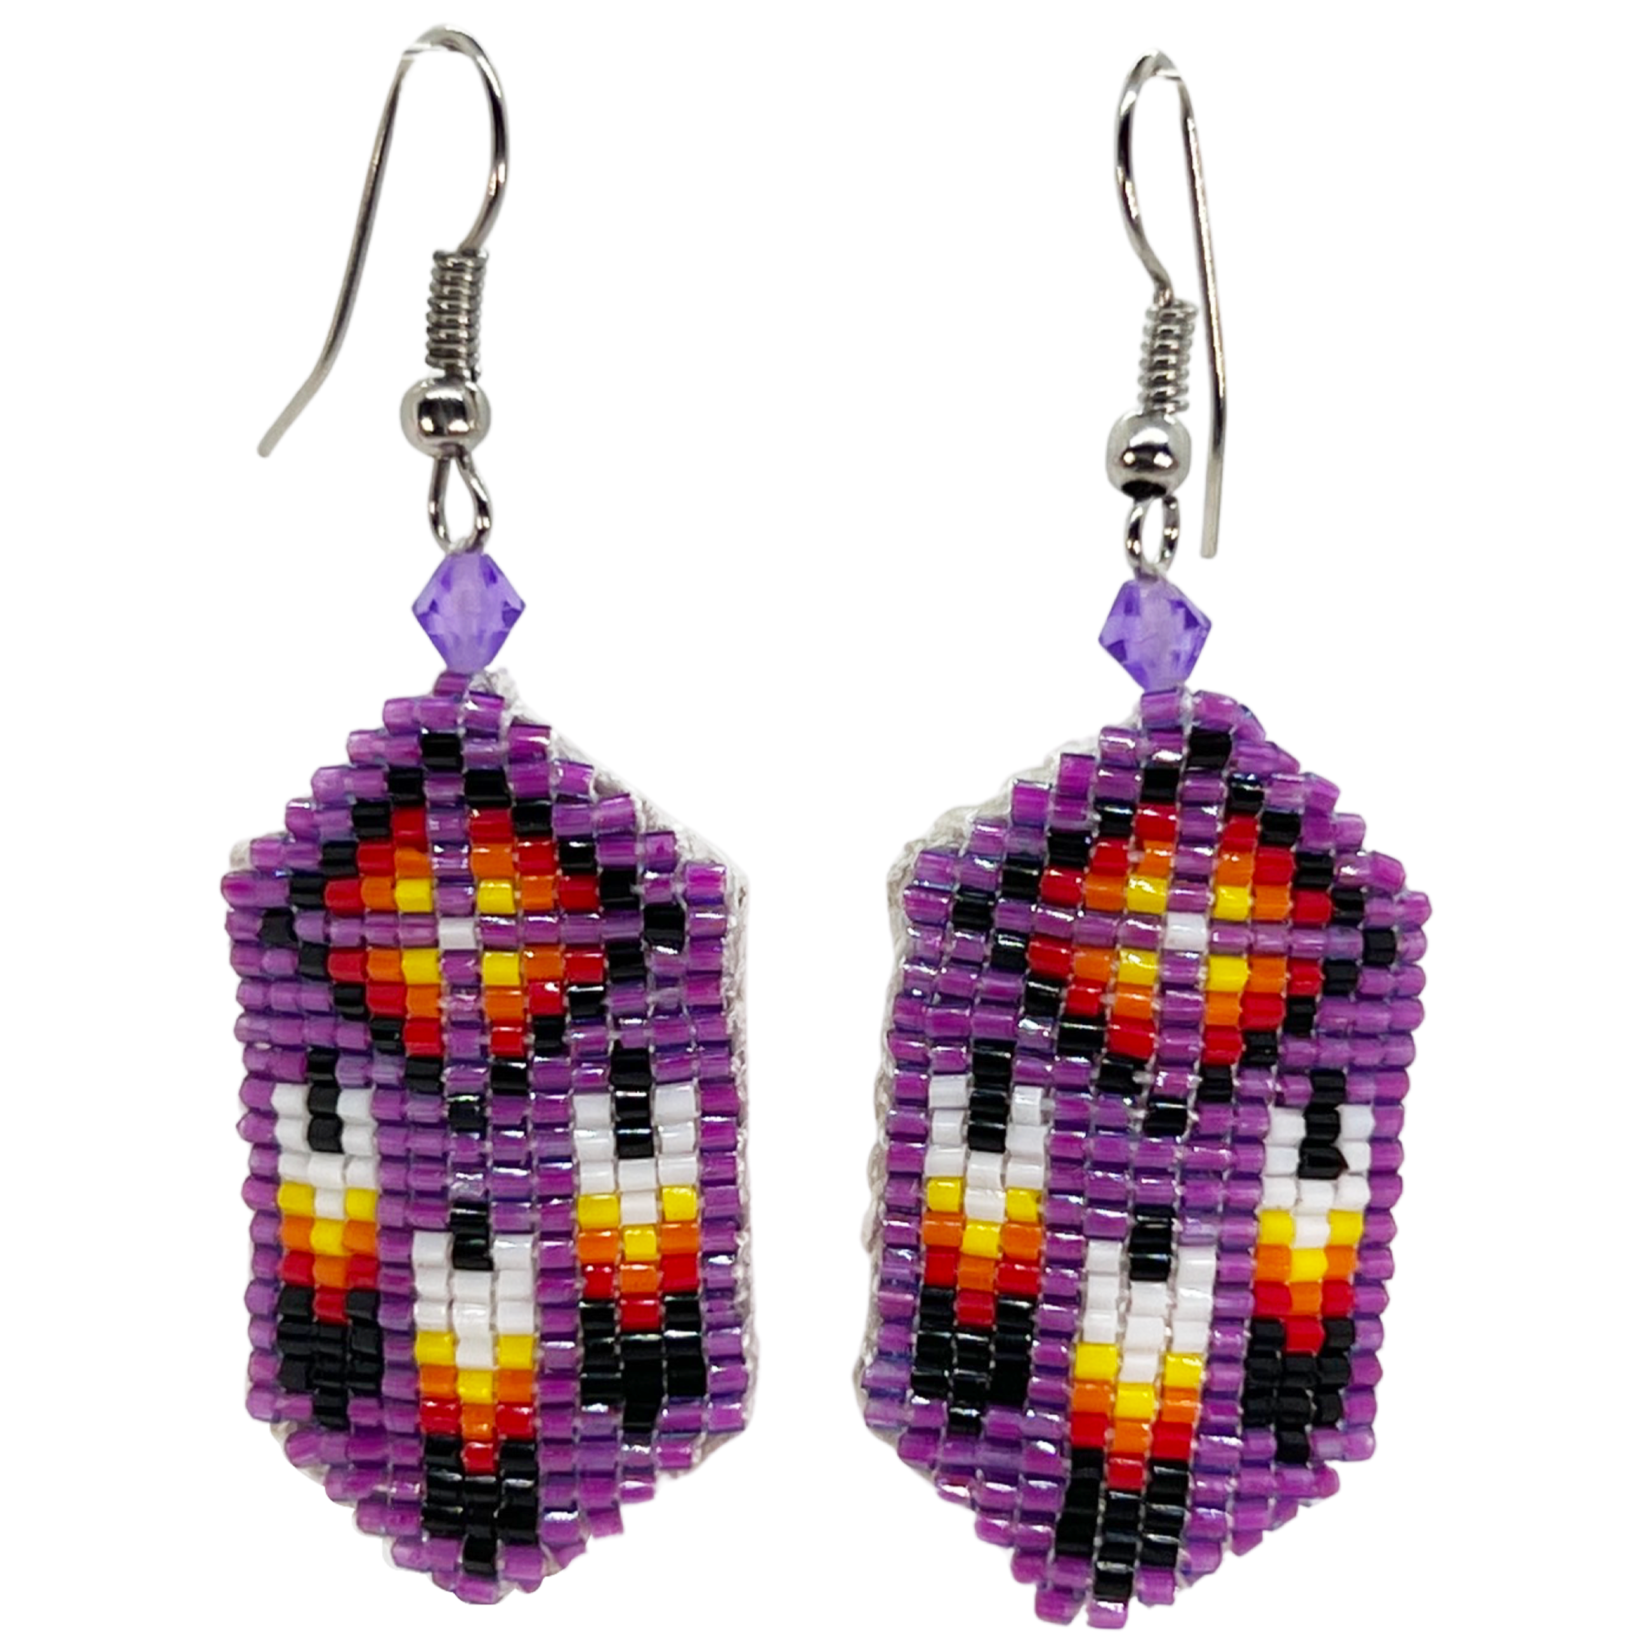 CUT GLASS EARRING - 11 ROWS - 3 FEATHERS